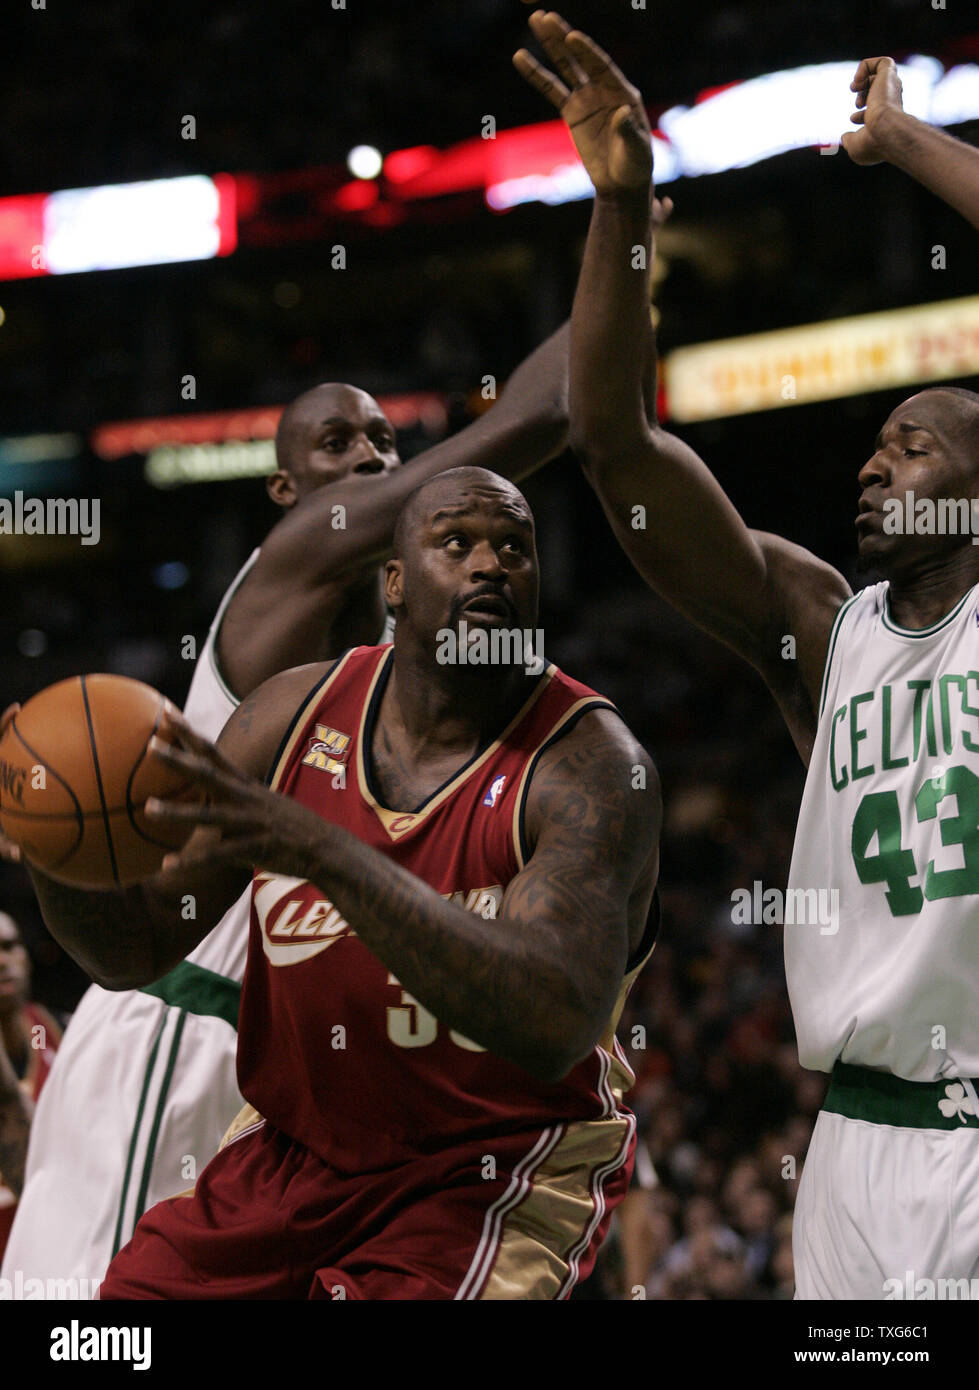 Cleveland Cavaliers center Shaquille O'Neal (33) drives to the net between Boston Celtics forward Kevin Garnett (L) and Boston Celtics center Kendrick Perkins (43) in the first half at the TD Garden in Boston, Massachusetts on February 25, 2010.   UPI/Matthew Healey Stock Photo